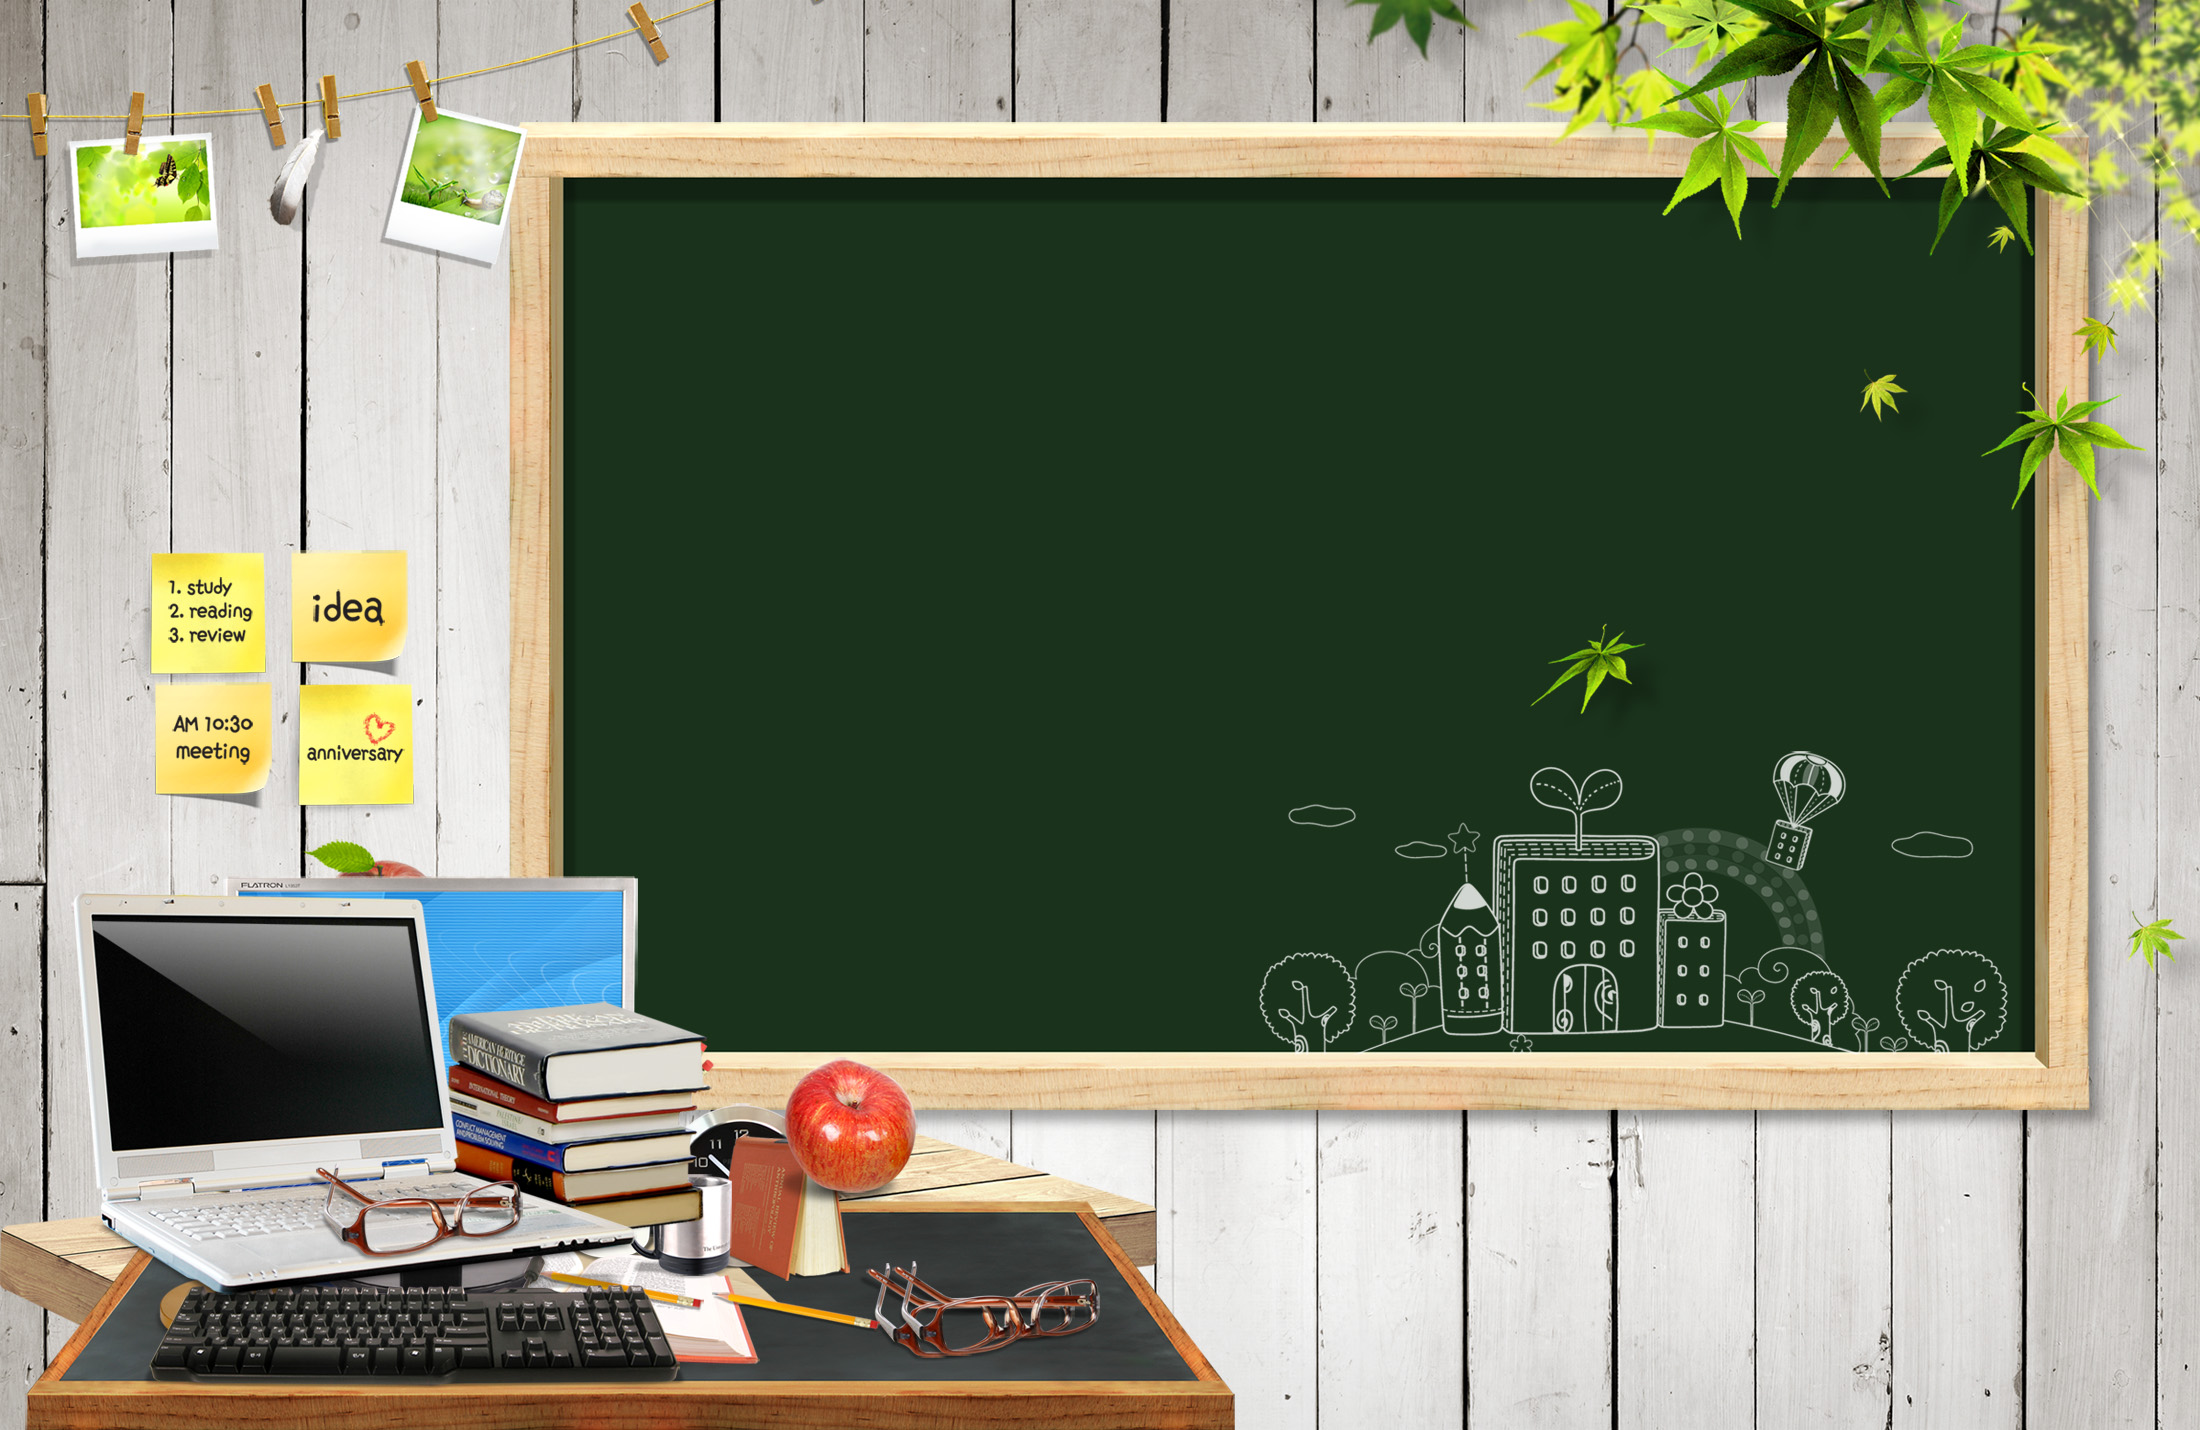 Study time for Education PPT Backgrounds, Study time for Education ppt  photos, Study time for Education ppt pictures, Study time for Education  powerpoint backgrounds